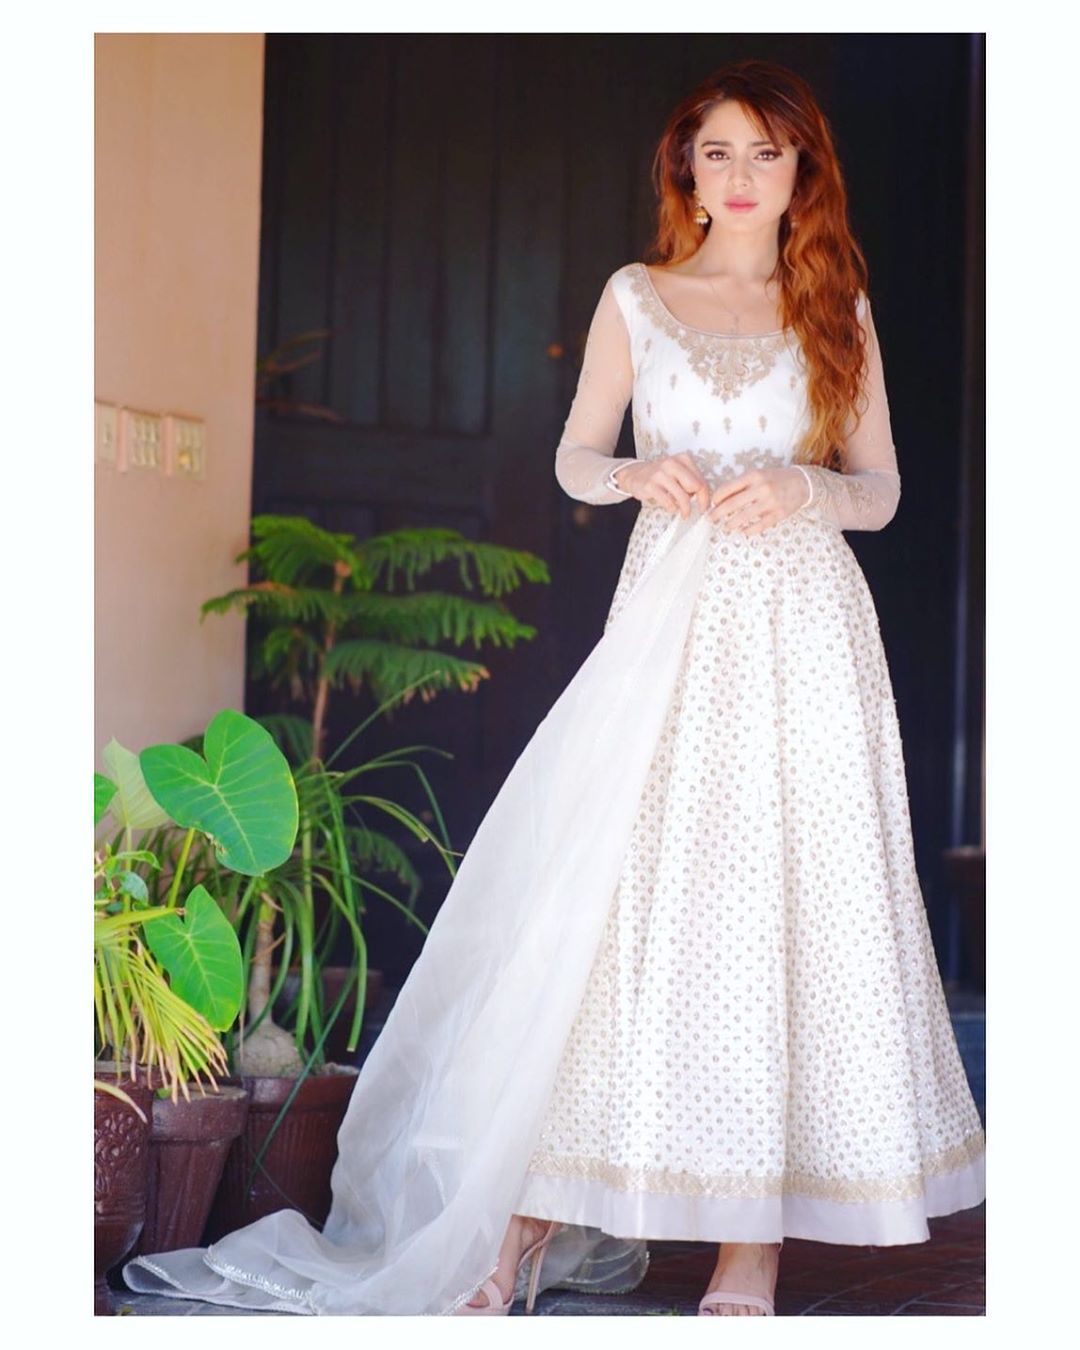 Aima Baig is Looking Gorgeous in this Beautiful White Dress